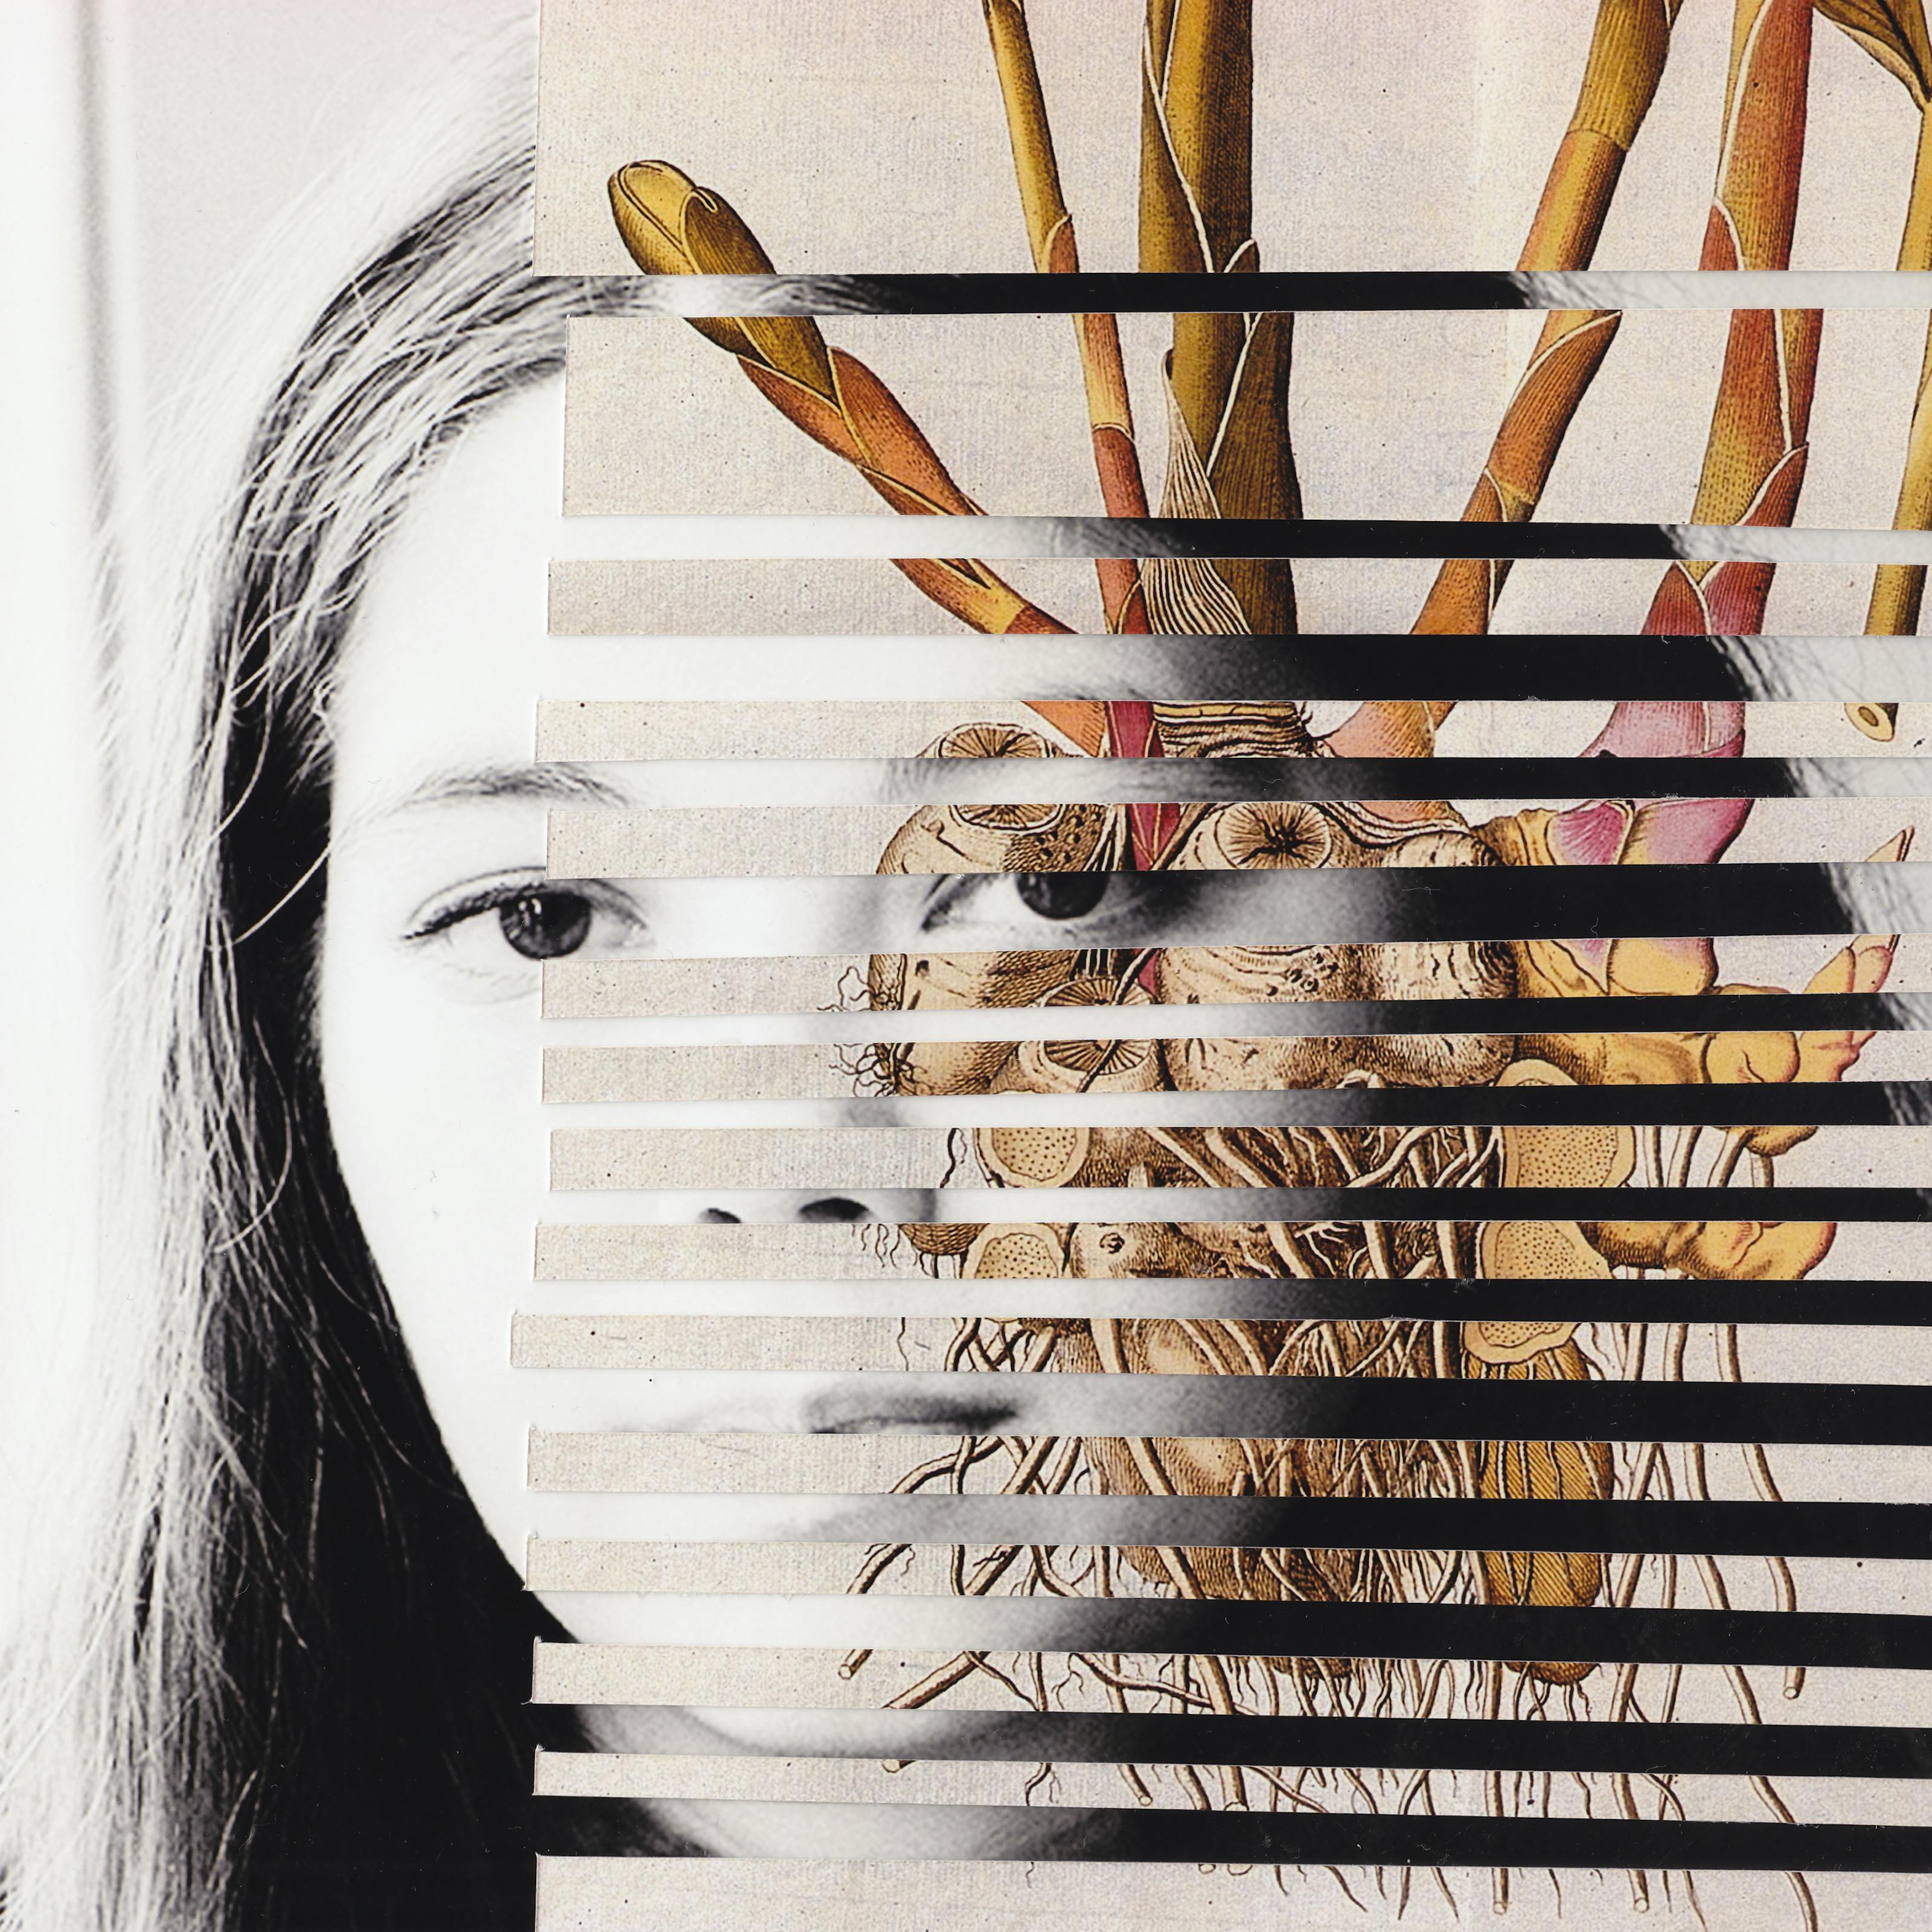 Mixed media collage artwork using a combination of photographic prints and archival illustrations. The background of the collage is made up of a black and white photograph of the head of a young woman with long dark hair. She is looking to camera with a neutral expression on her face. Overlaid on top of her portrait are horizontal strips of a colour illustration showing a botanical drawing of a ginger plant, showing the stems and roots. The horizontal strips are spaced out such that the portrait beneath can be seen through the gaps.